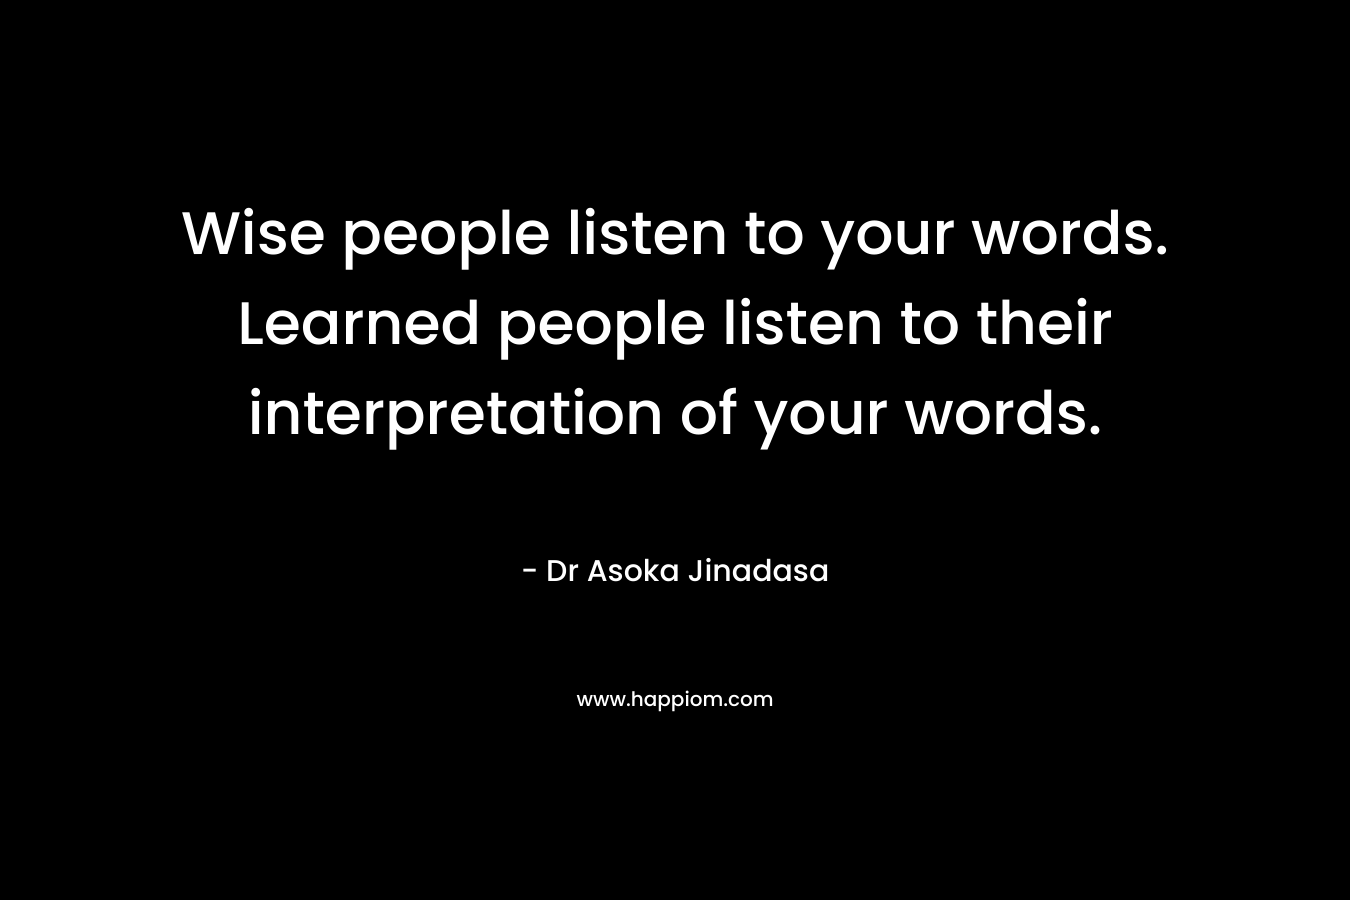 Wise people listen to your words. Learned people listen to their interpretation of your words. – Dr Asoka Jinadasa